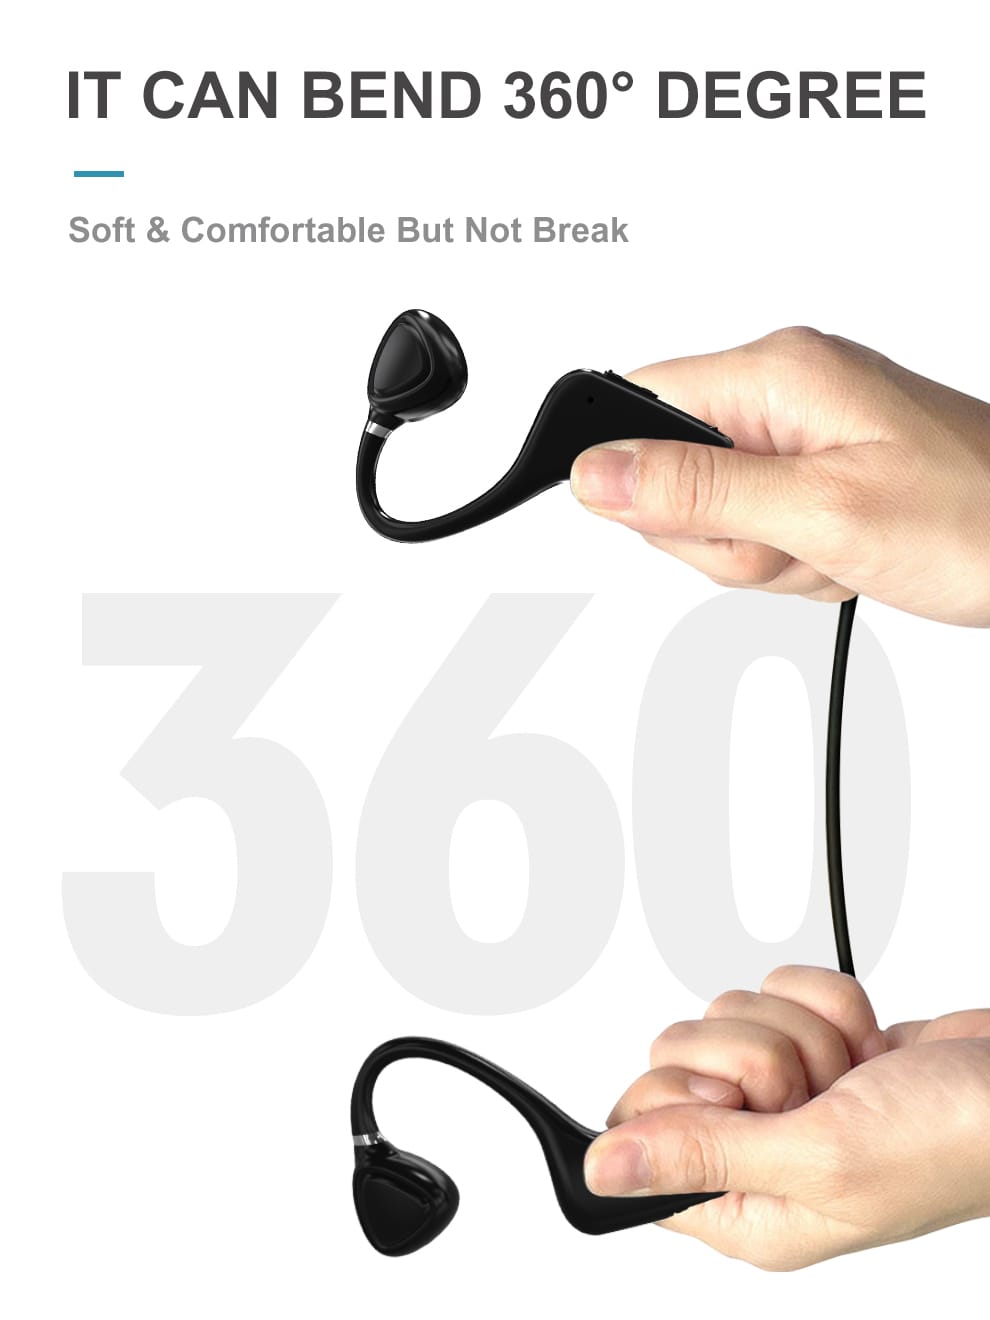 YES! IT'S HEARING AIDS SYSTEM, 2 functions in One system, eEAR® eEAR-BC-CIC-010 Bluetooth BONE CONDUCTION HEARING AID 2 in One SYSTEM Rechargeable CIC Hearing Aids & Bone Conduction BT Sold 10,000+ worldwide